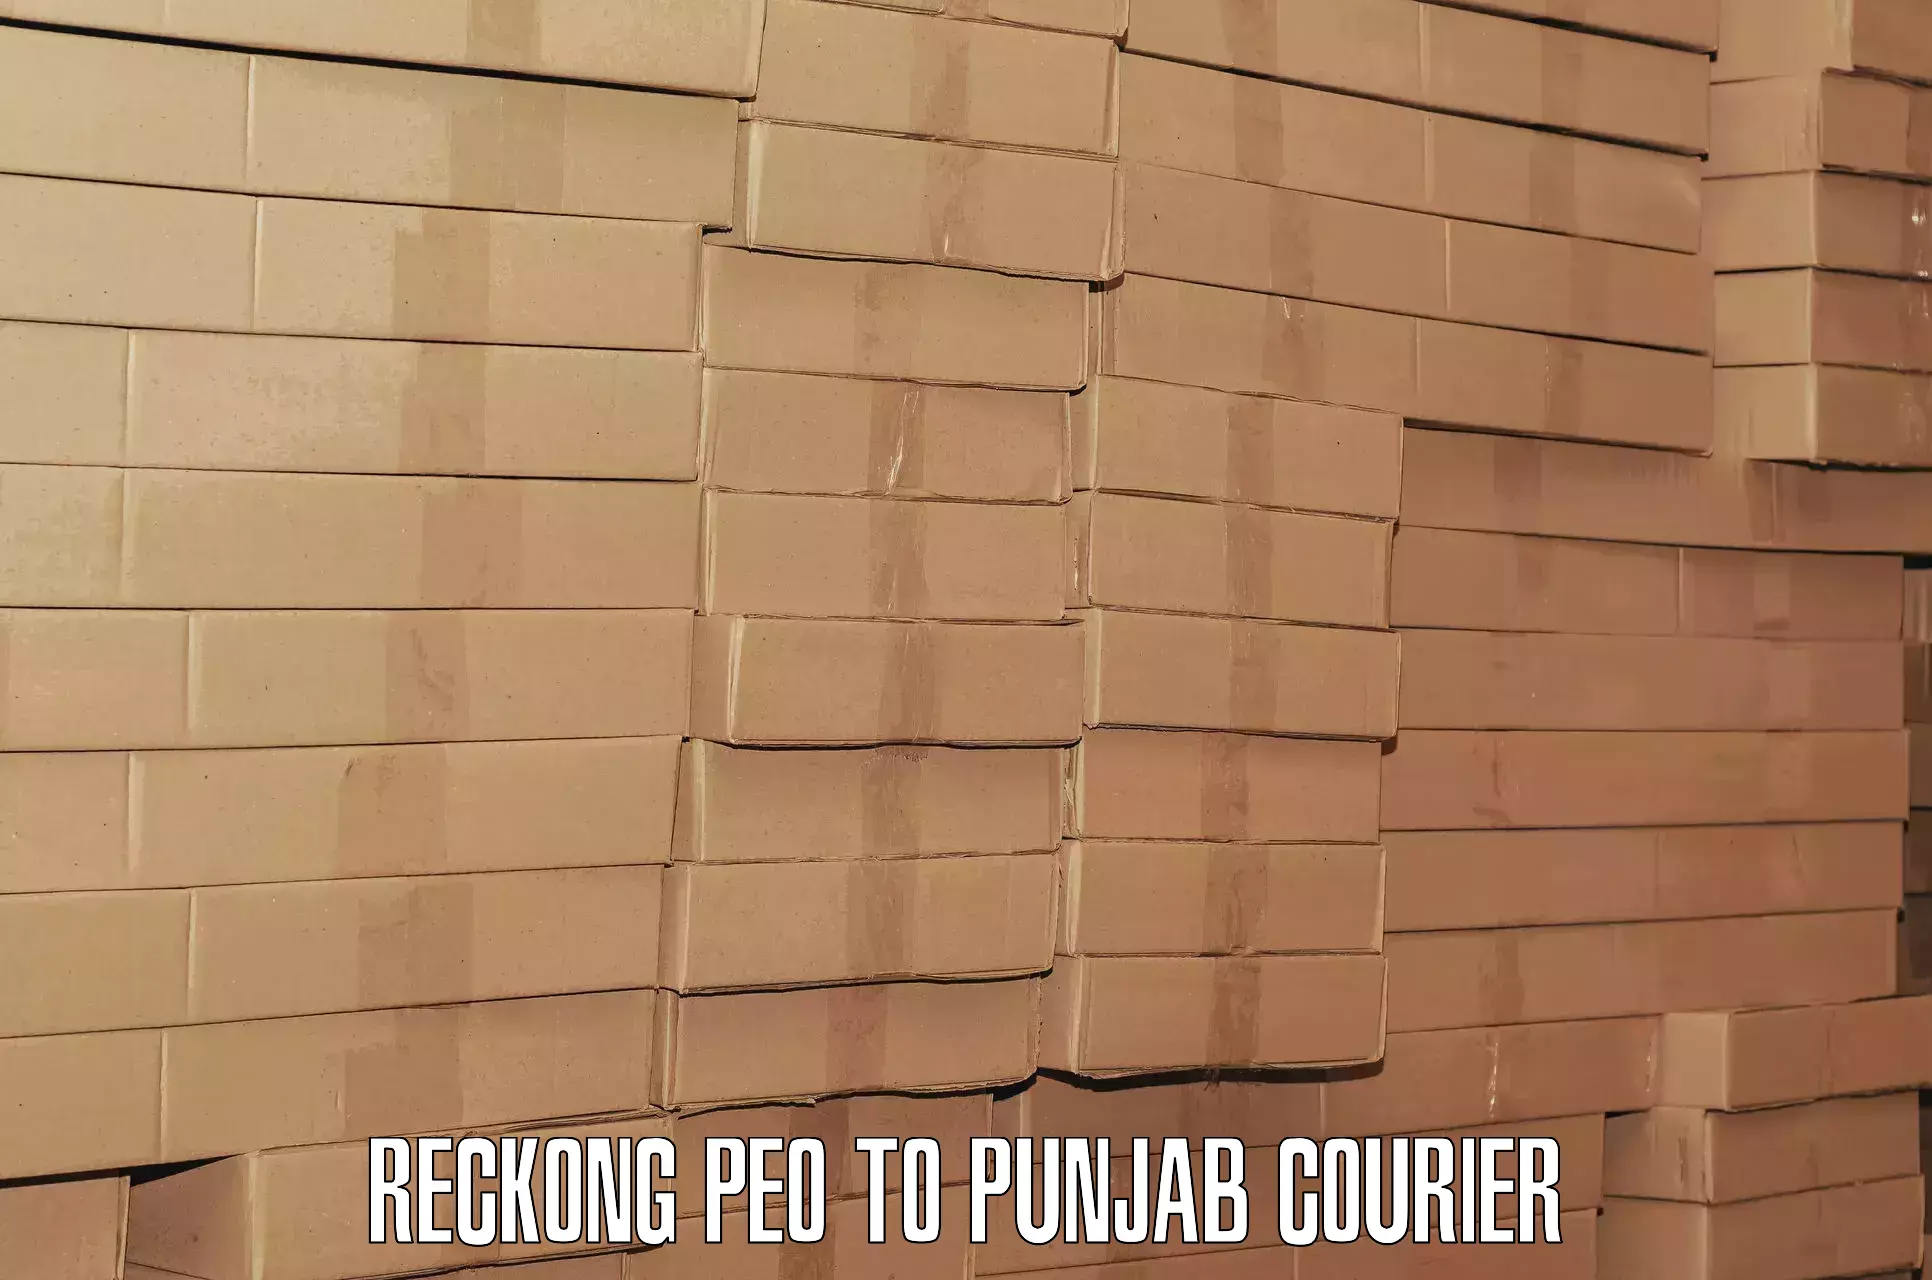 Luggage shipment tracking Reckong Peo to Patiala